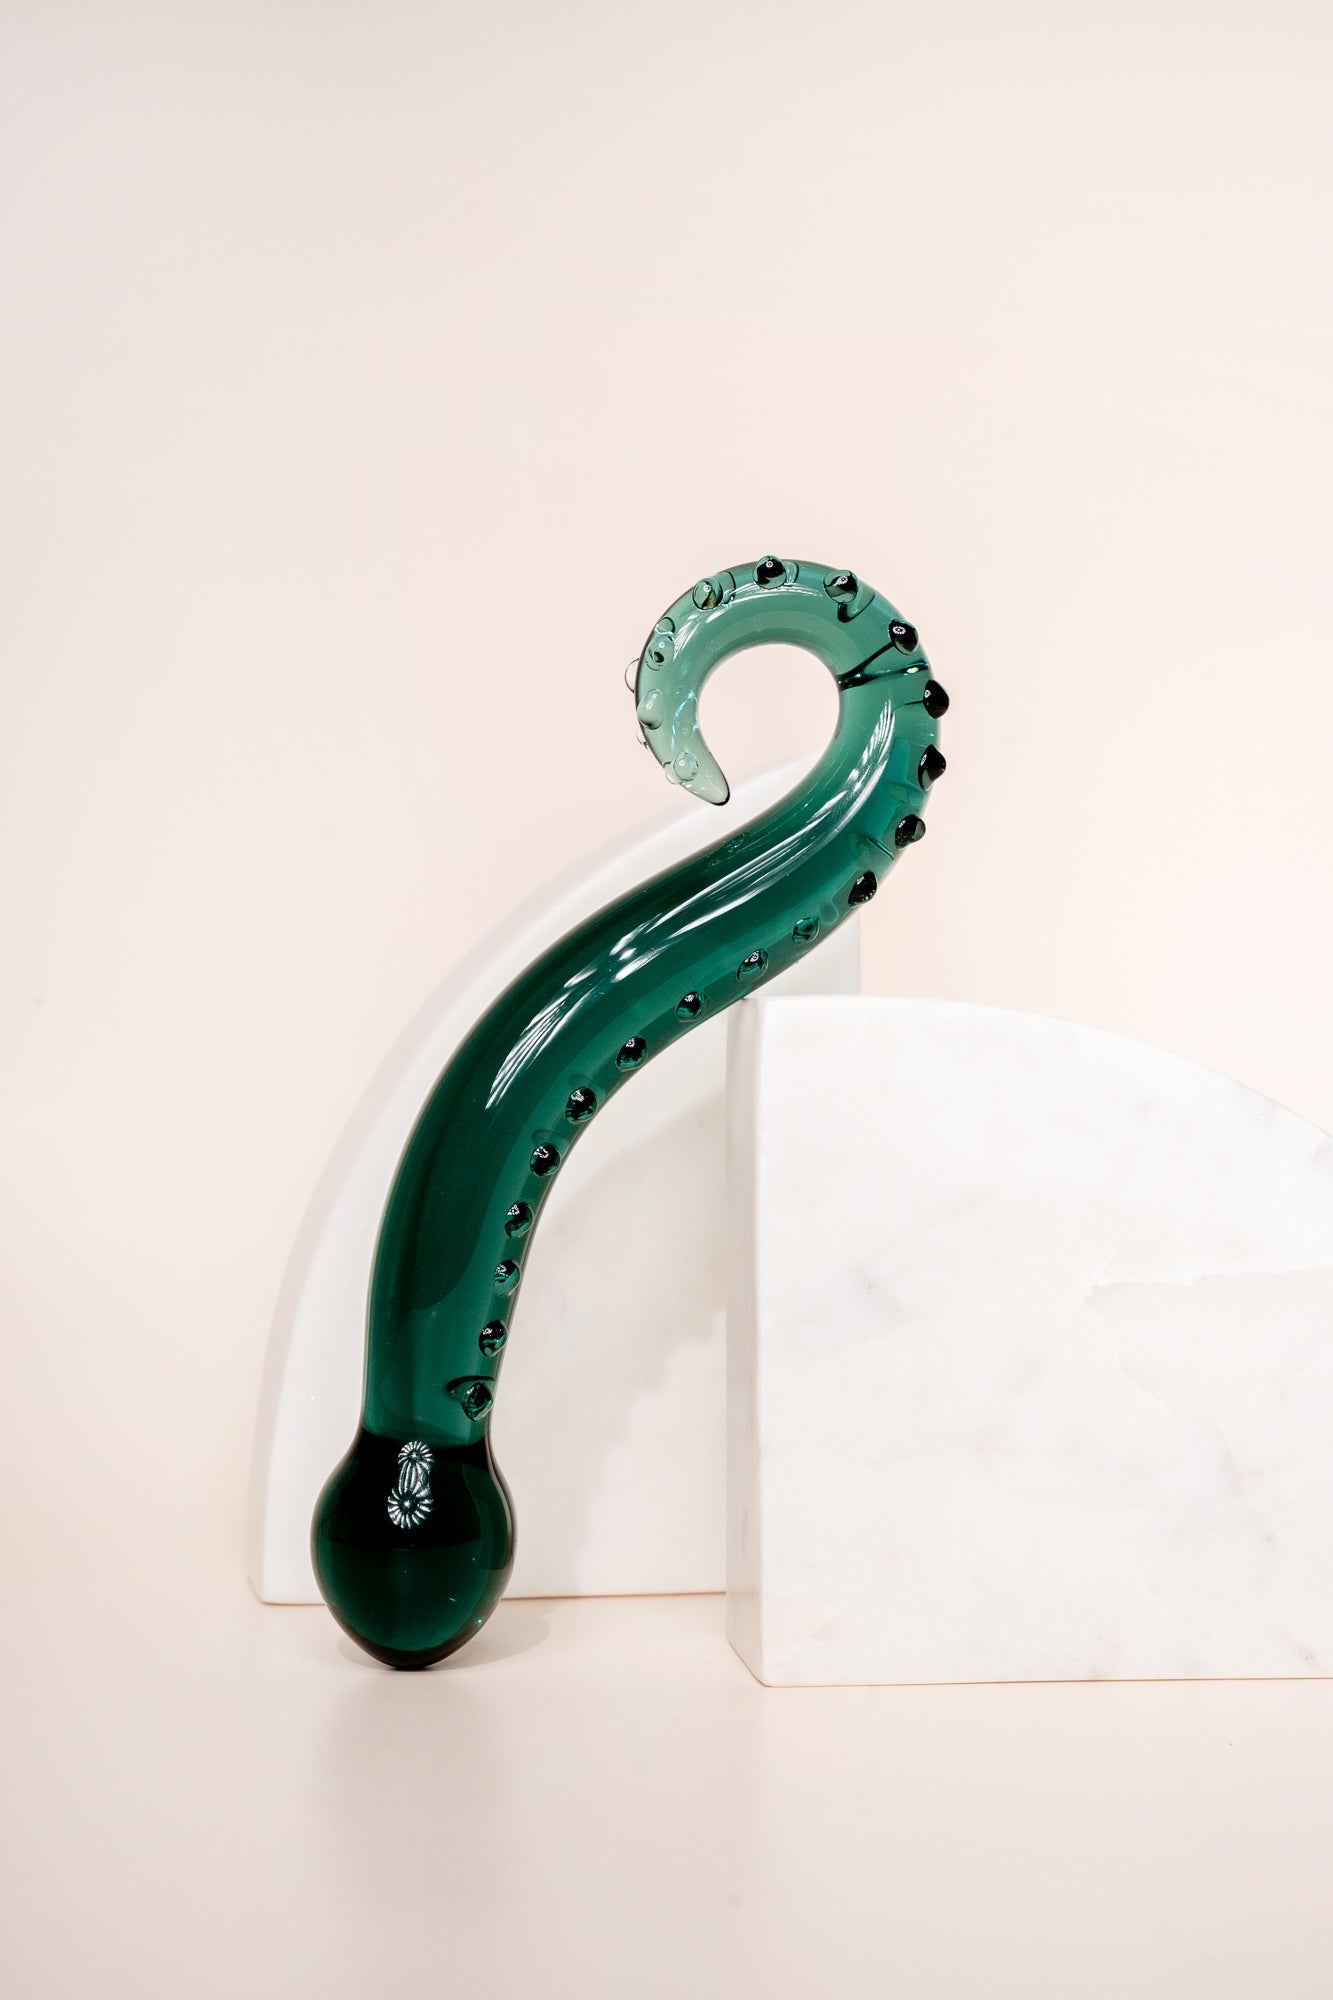 Dark green coloured glass pleasure wand (Octopussy). Pictured on white background with marble coloured arch blocks.